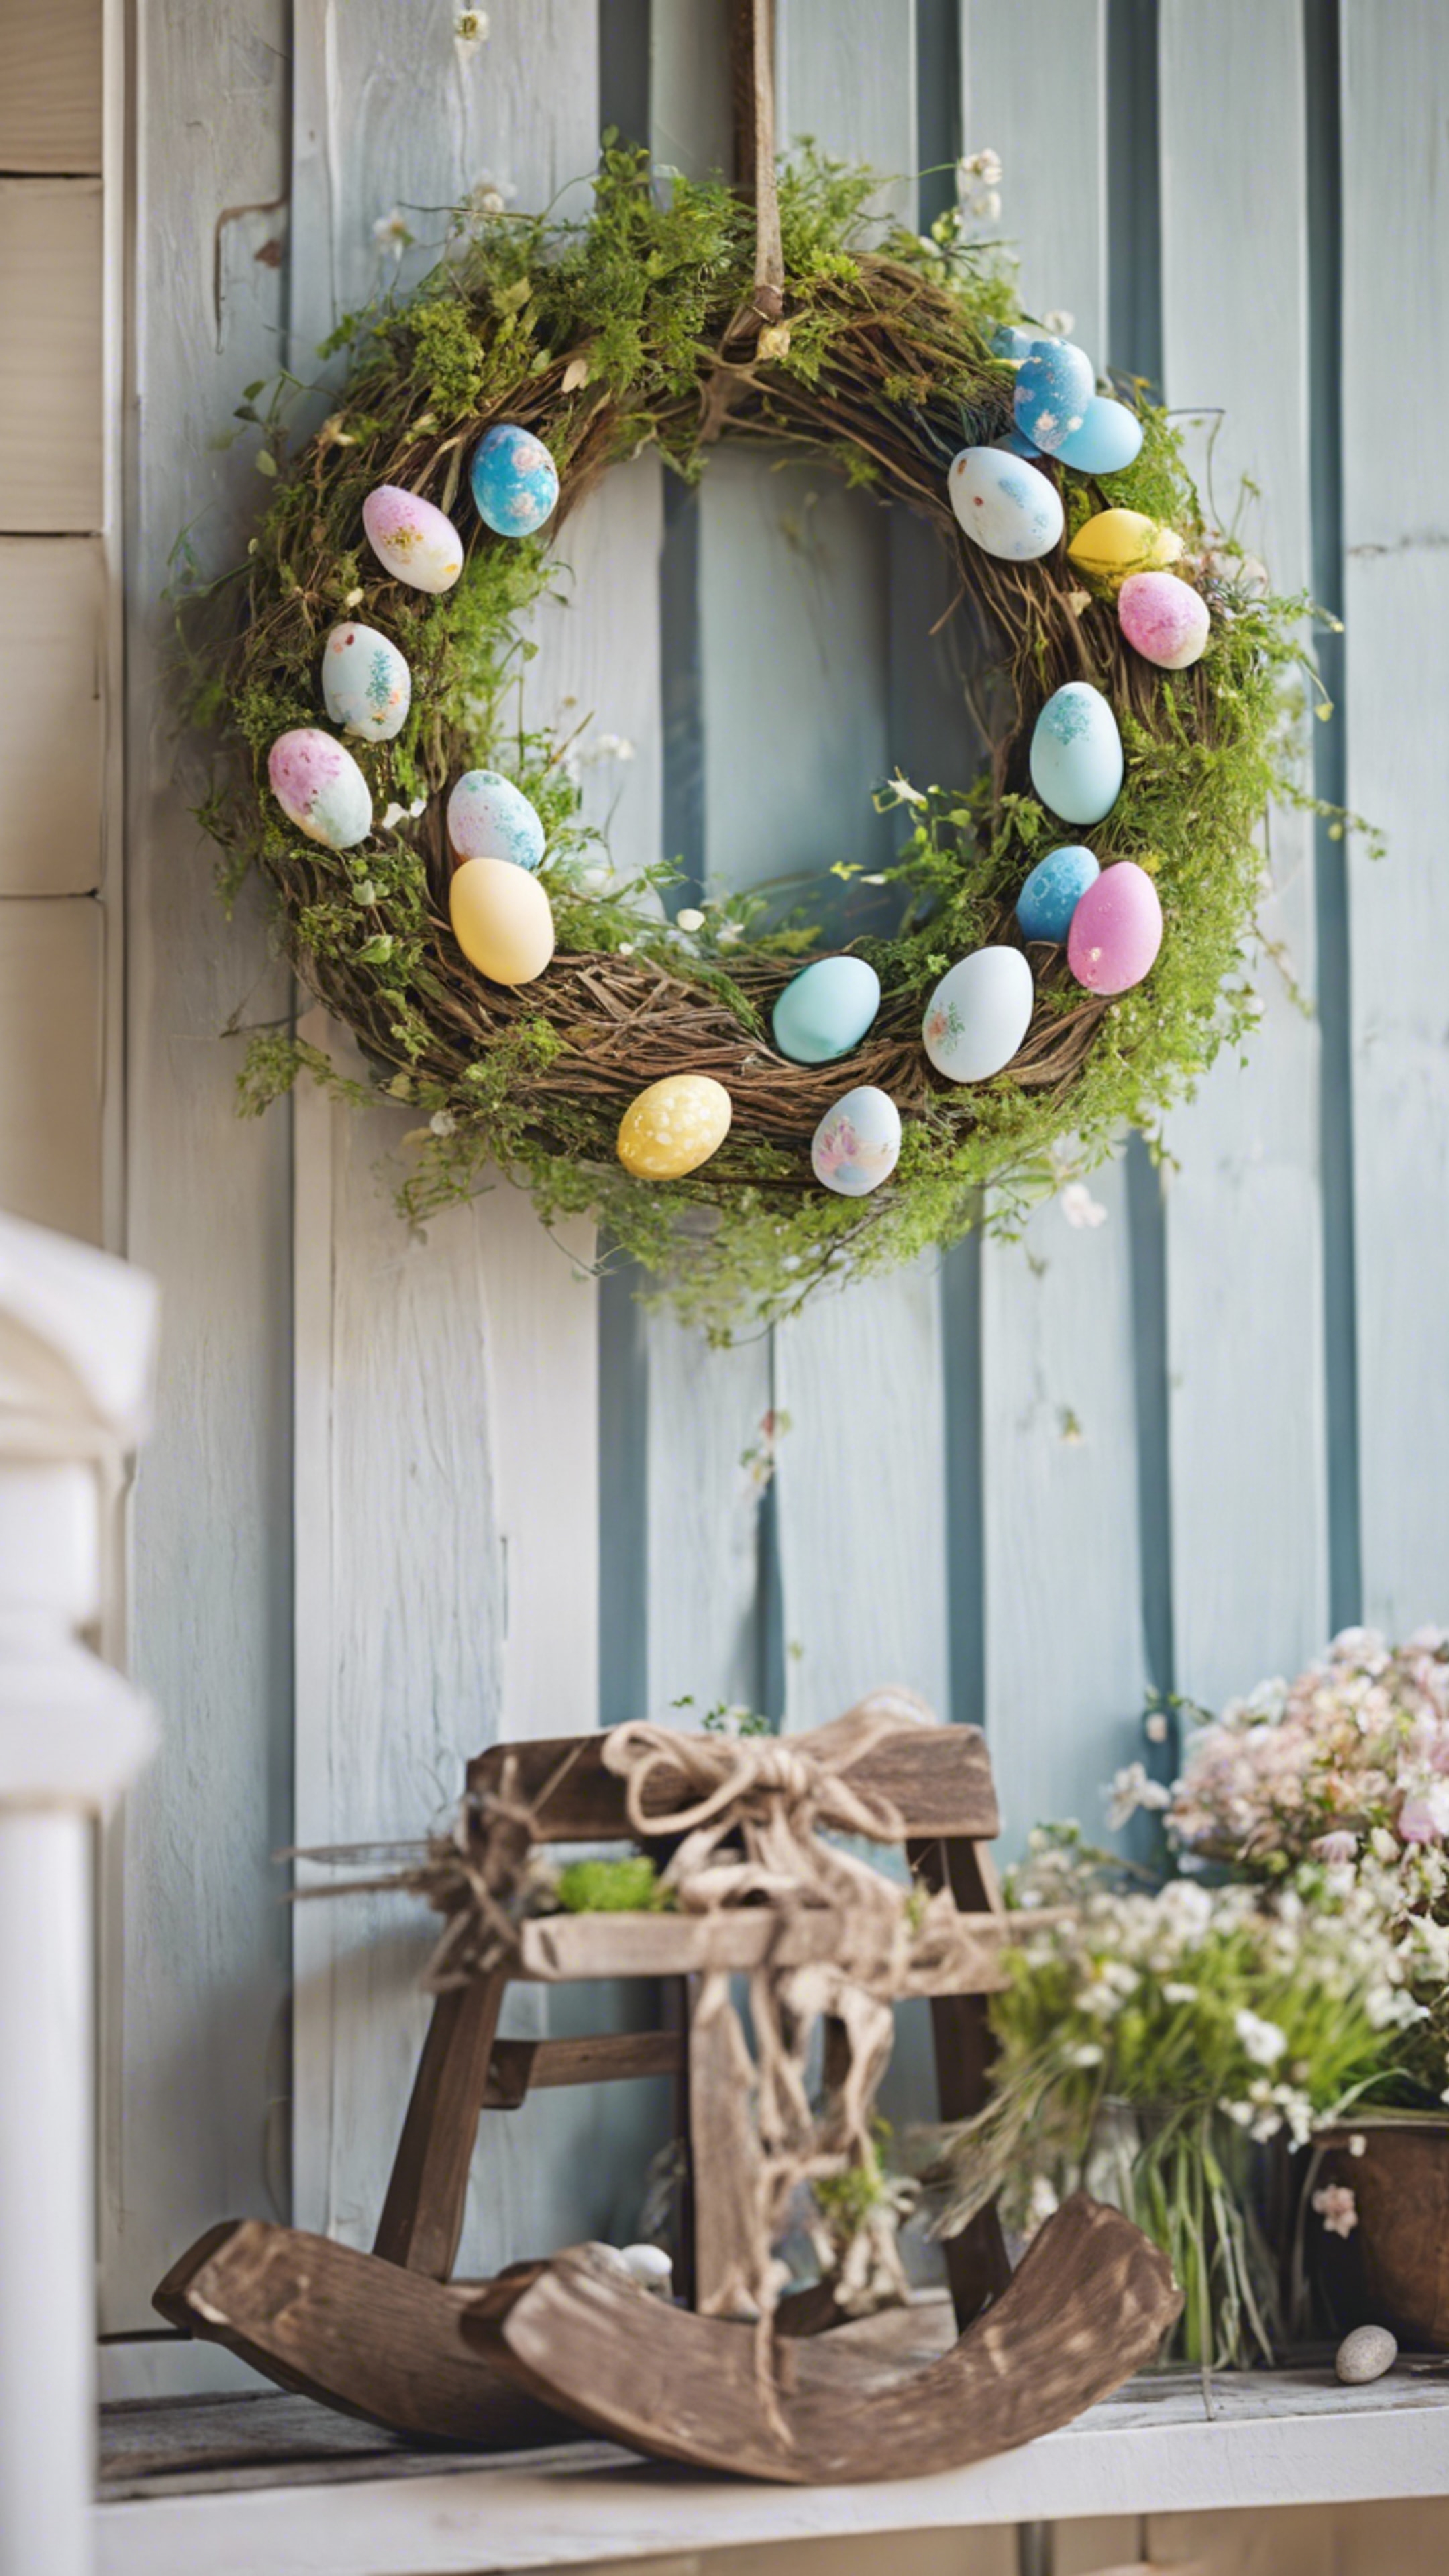 Country-style Easter decorative wreath hanging on a front porch, inviting the spring spirits. Tapeta[efa72fd9539f4de39955]